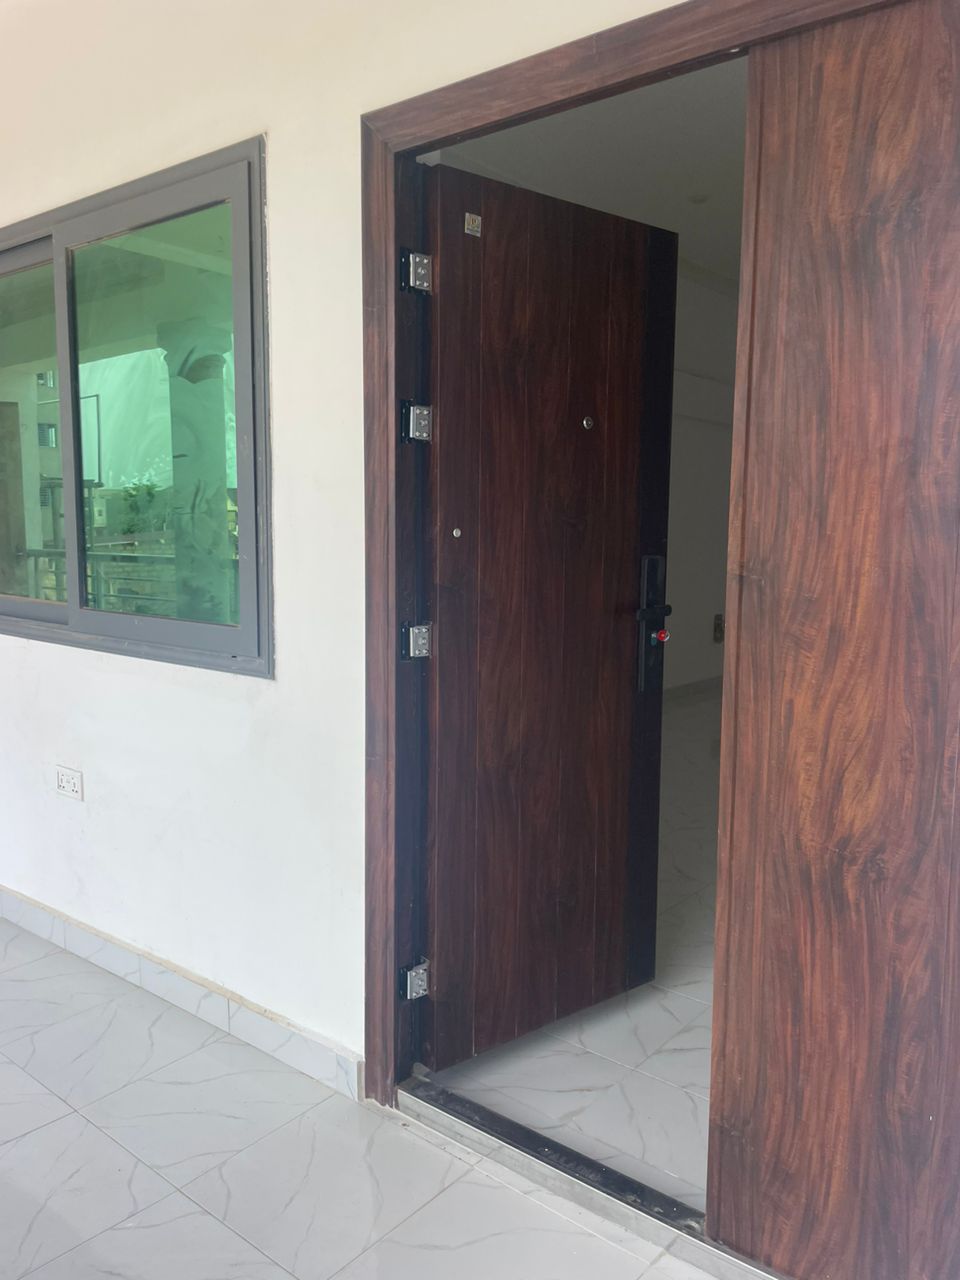 Two (2) Bedroom Apartments for Rent at Tse Addo